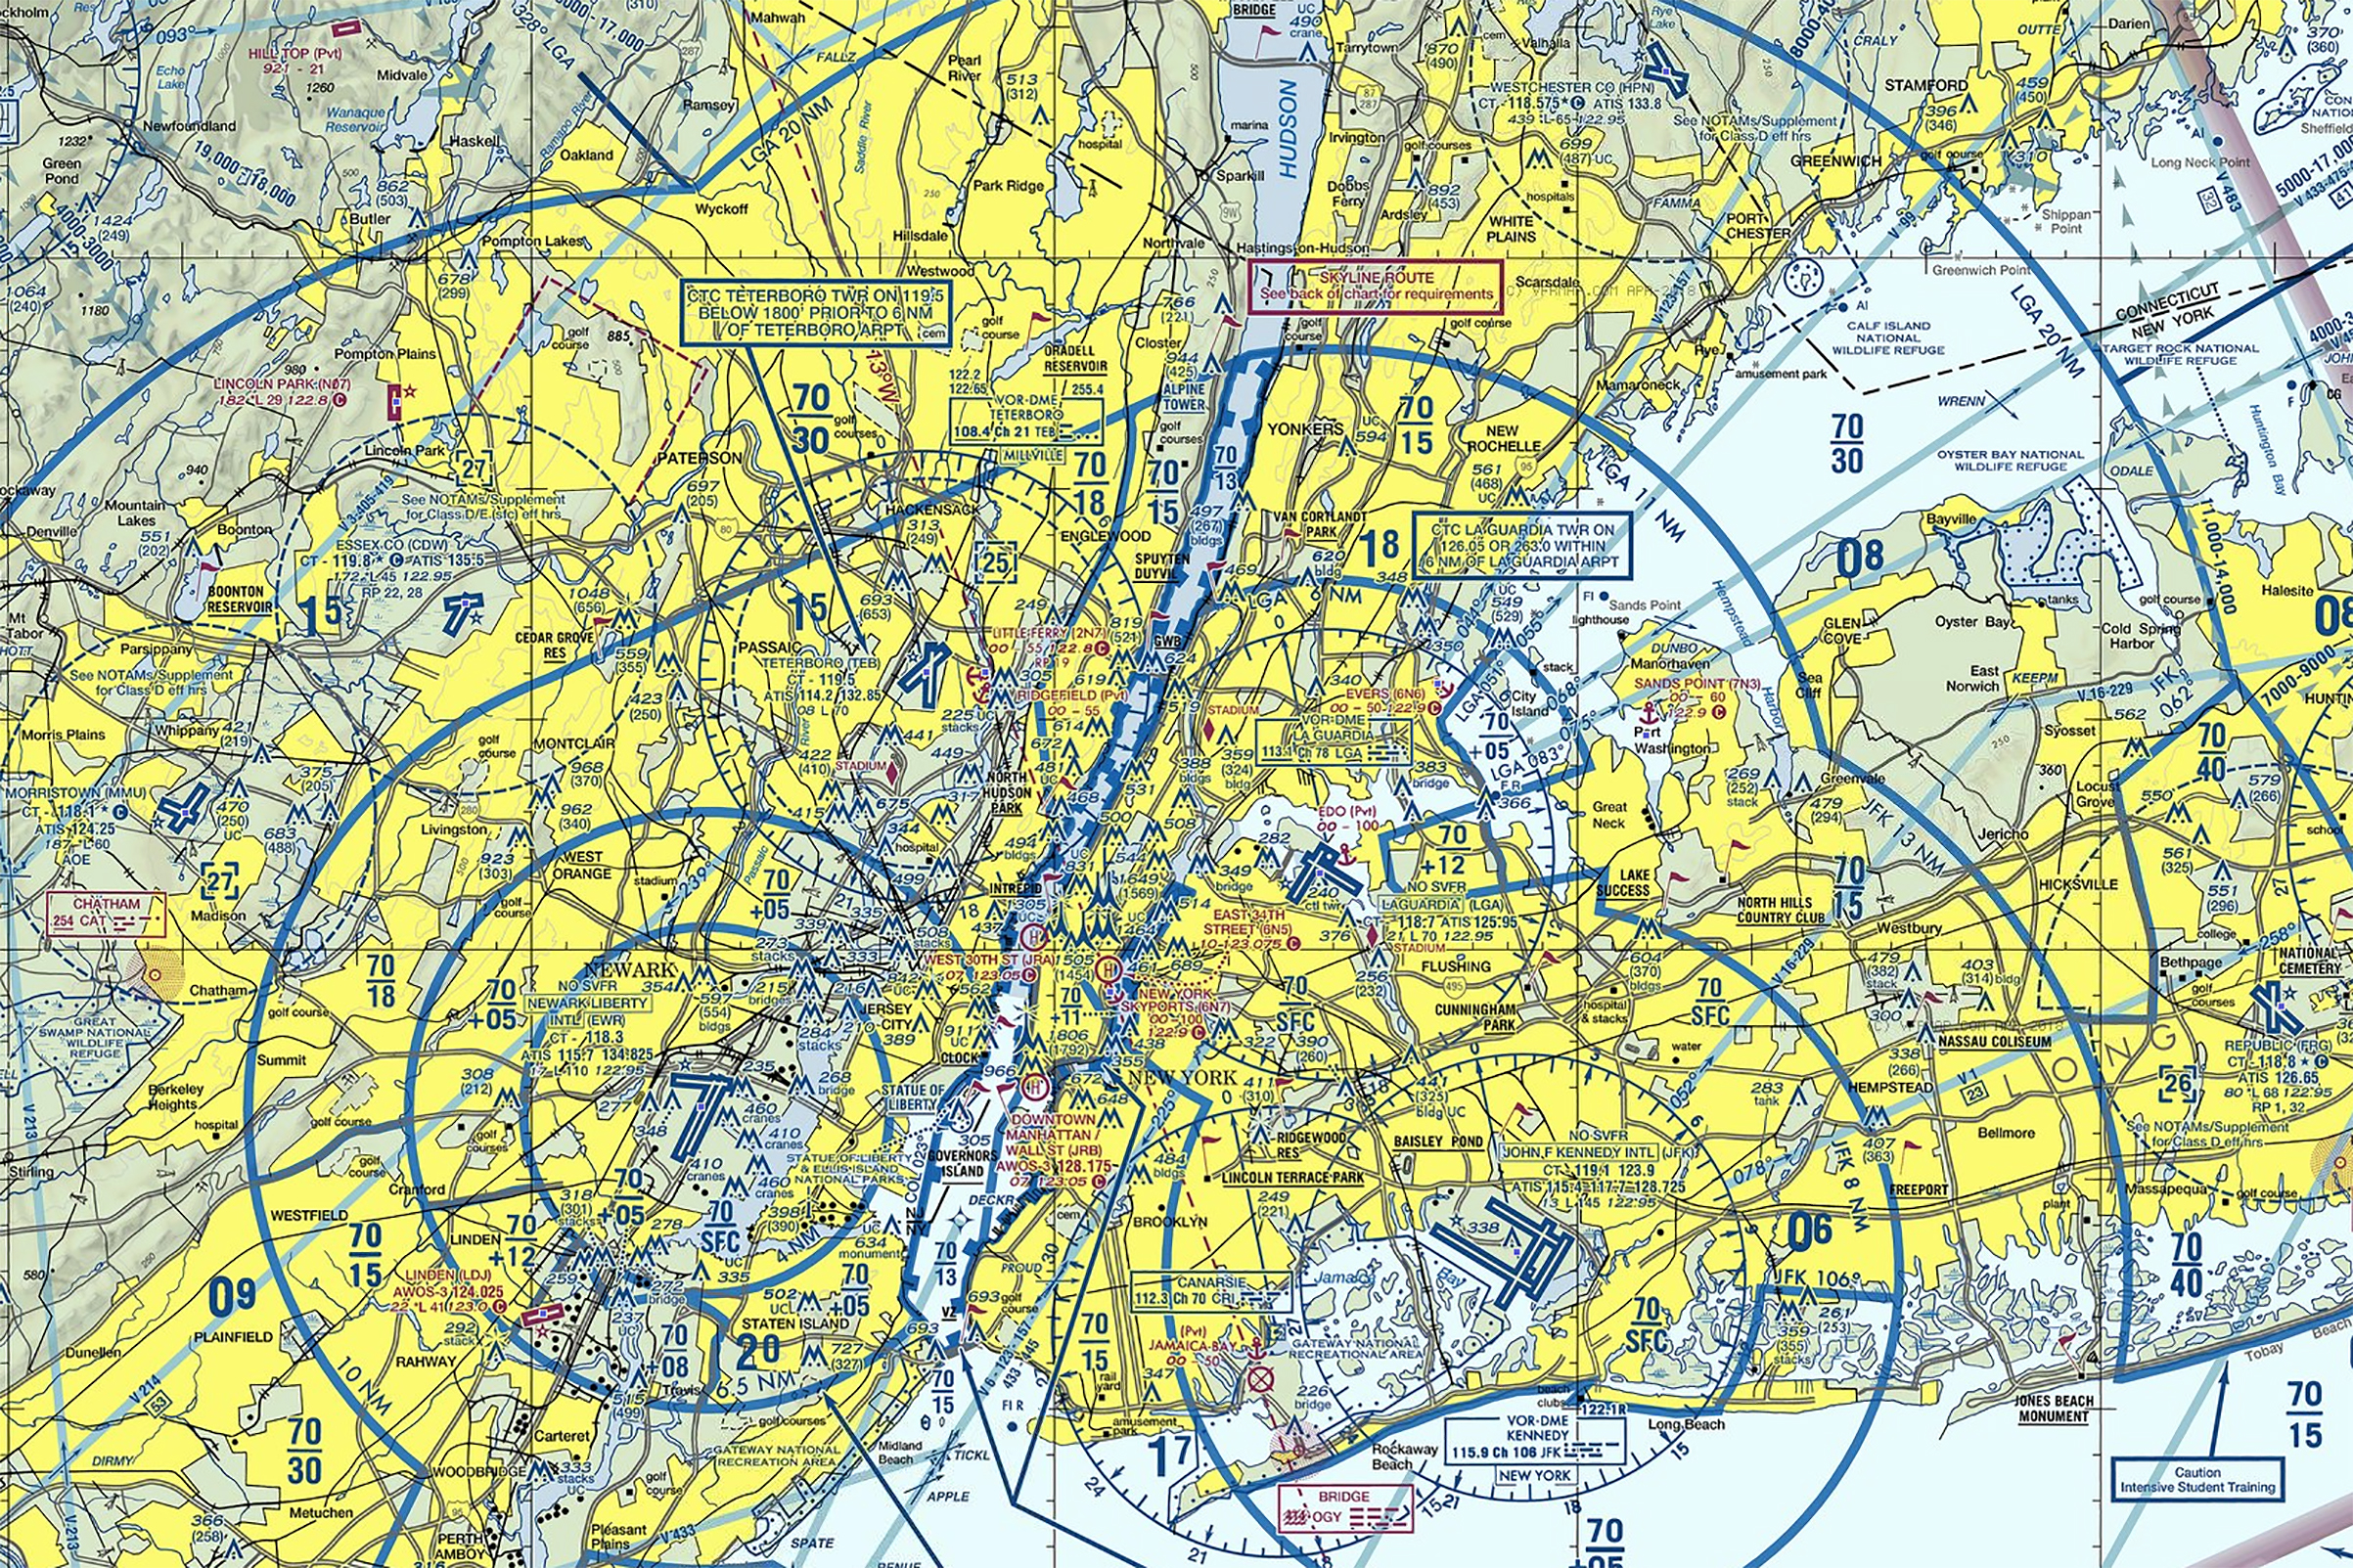 A sectional aeronautical chart of New York City showing the airspace above the city. (Vfrmap.com)